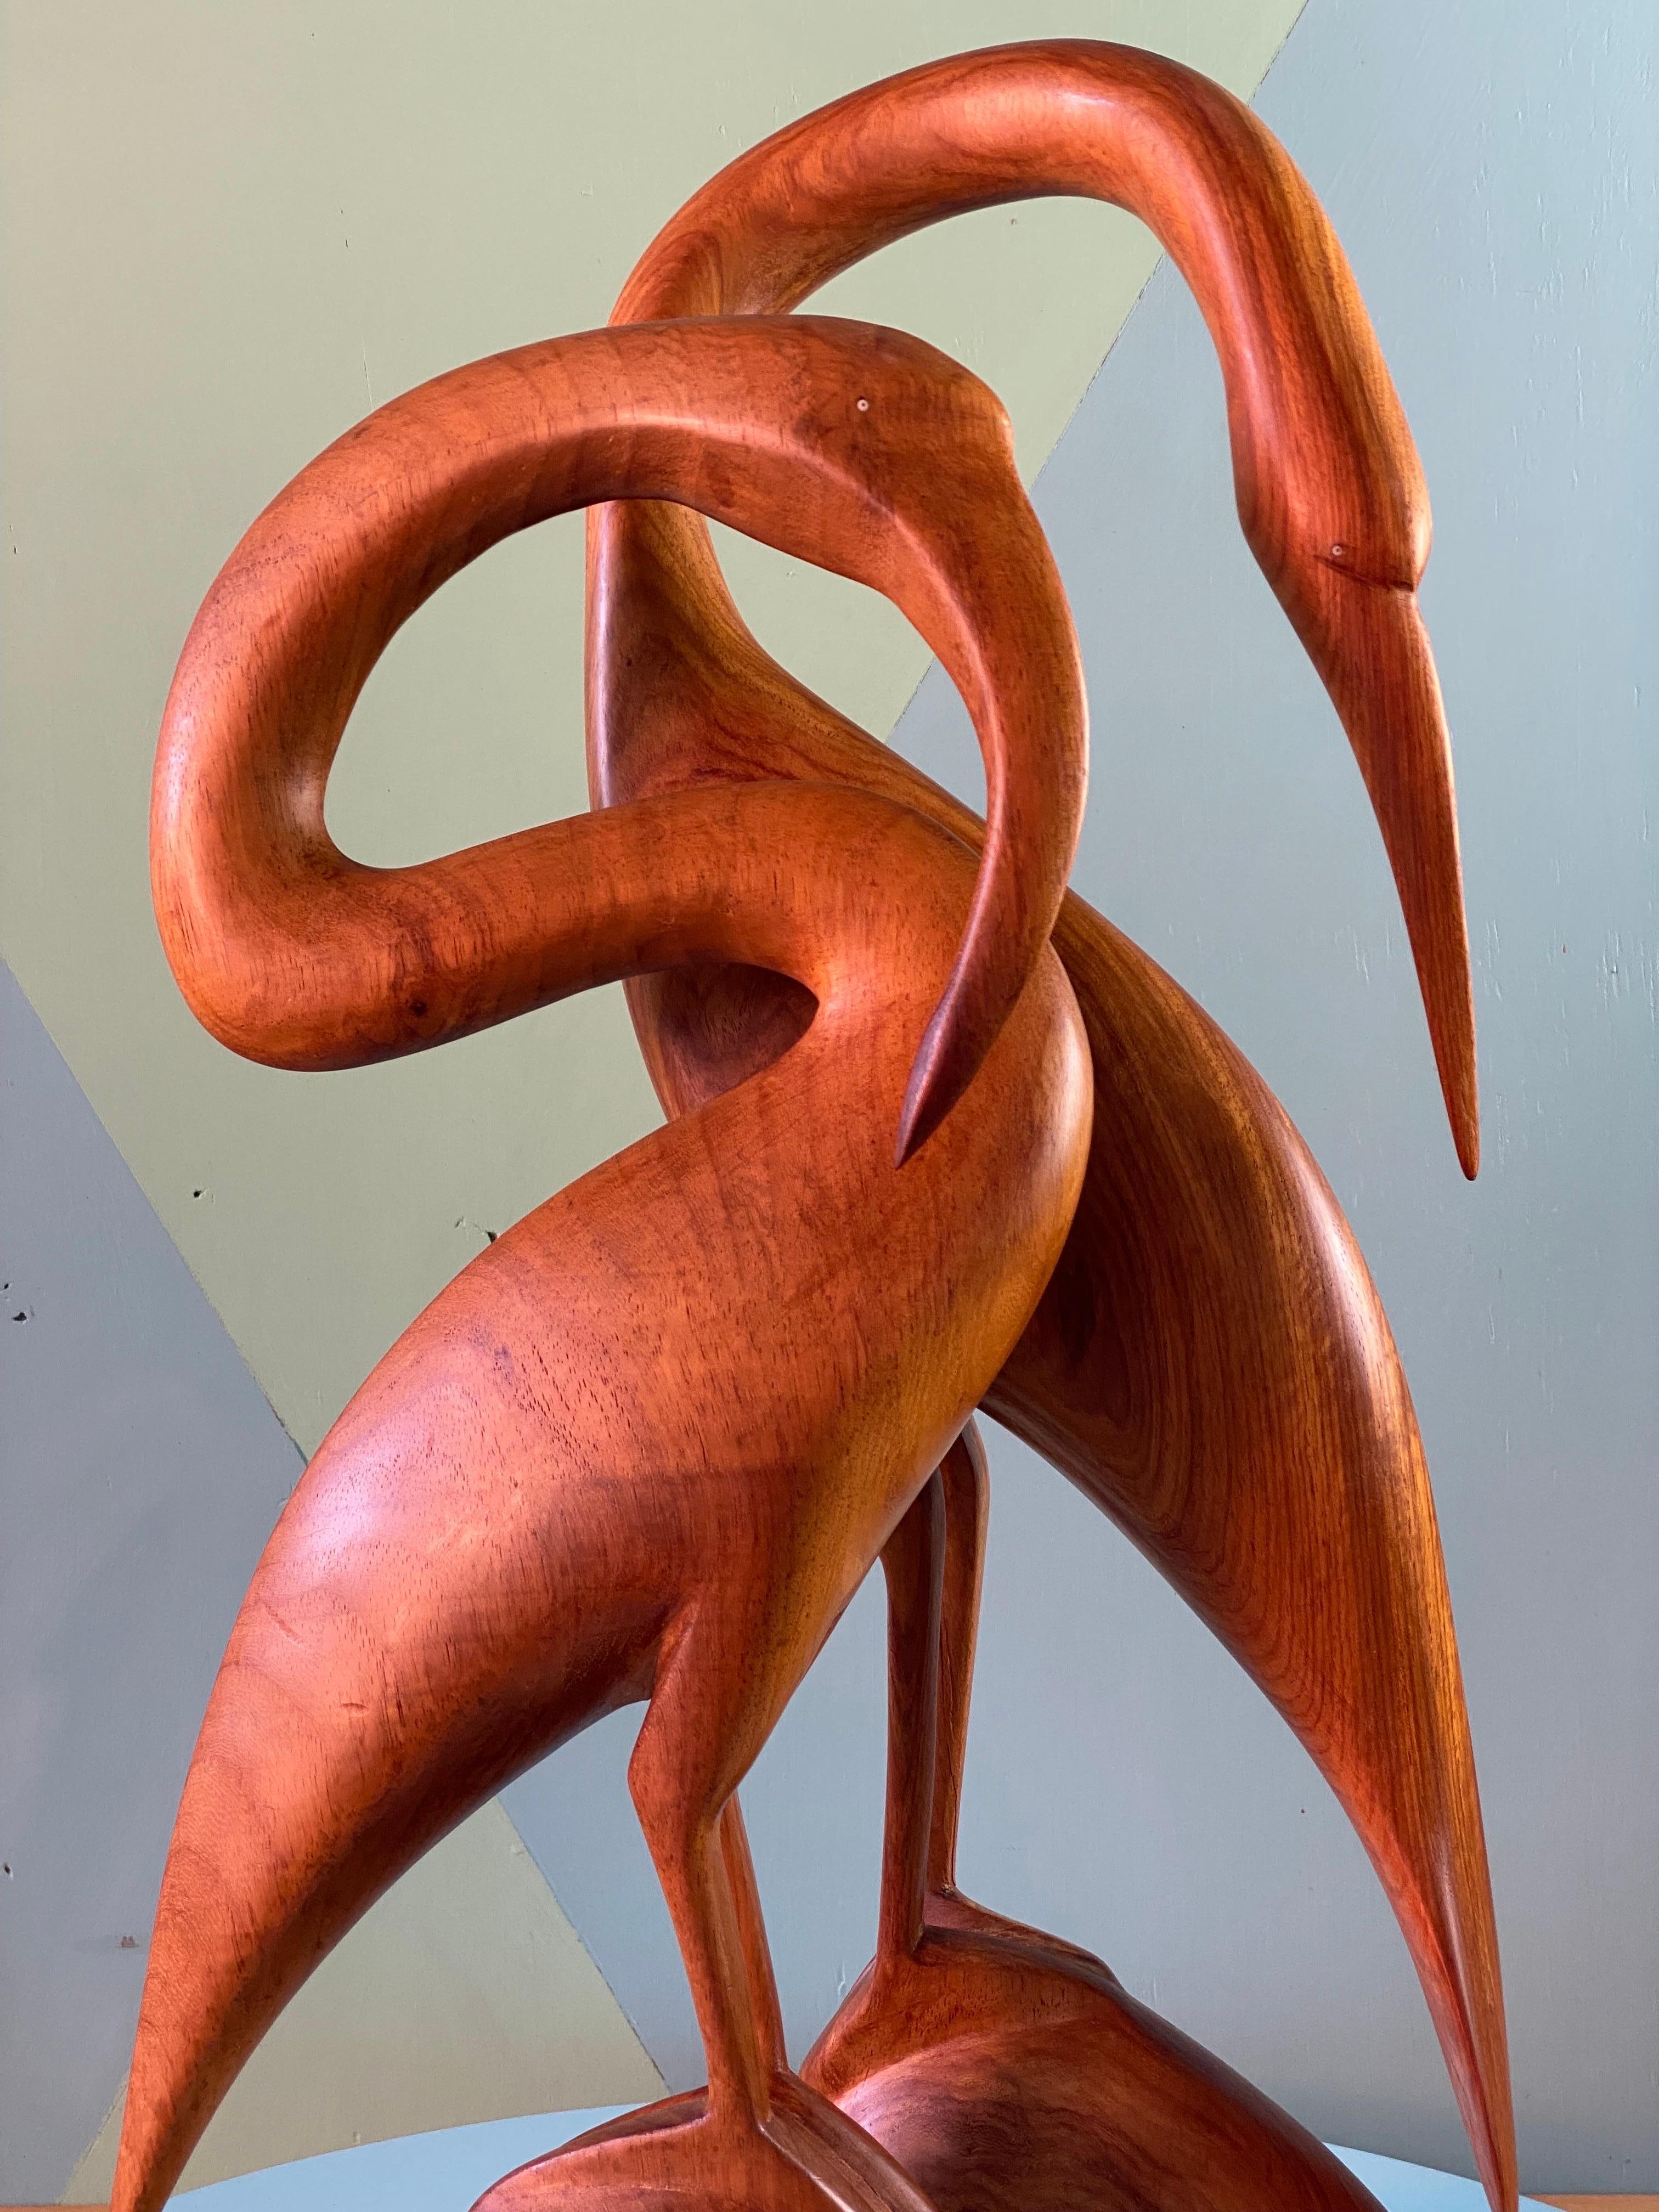 A pair of hand carved teak Heron, dating to the late 1960s, perhaps early 1970s. 

There are no makers marks, signatures or labels. Balinese or Sumatran, indicated by the teak wood, sinuous style and carving skill required for this level of